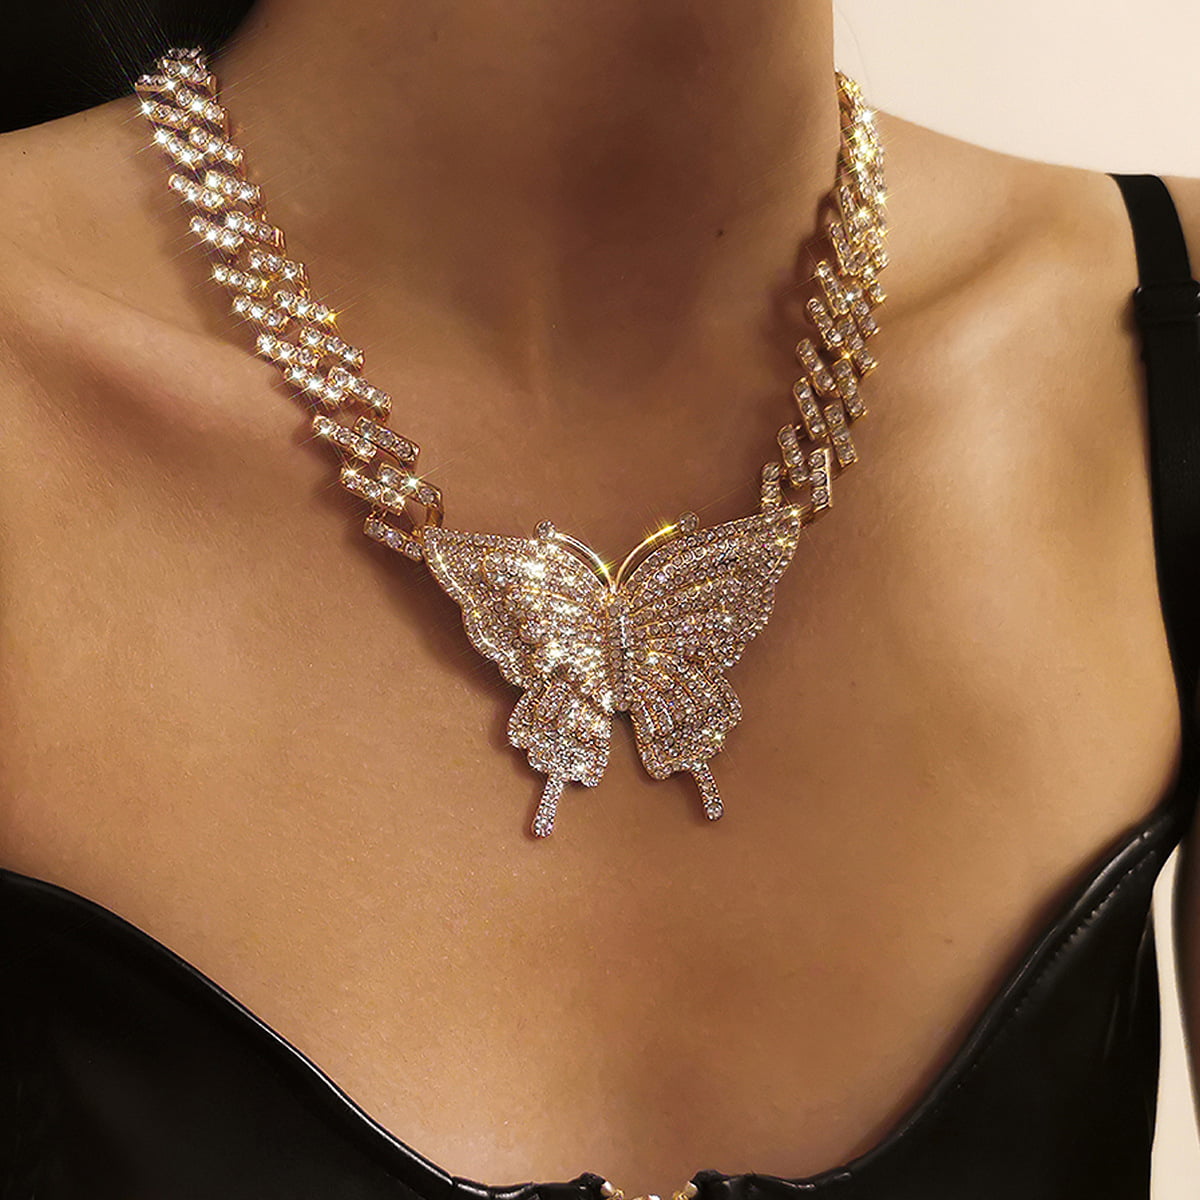 Vintage Rhinestone Butterfly Necklace – Dovetail